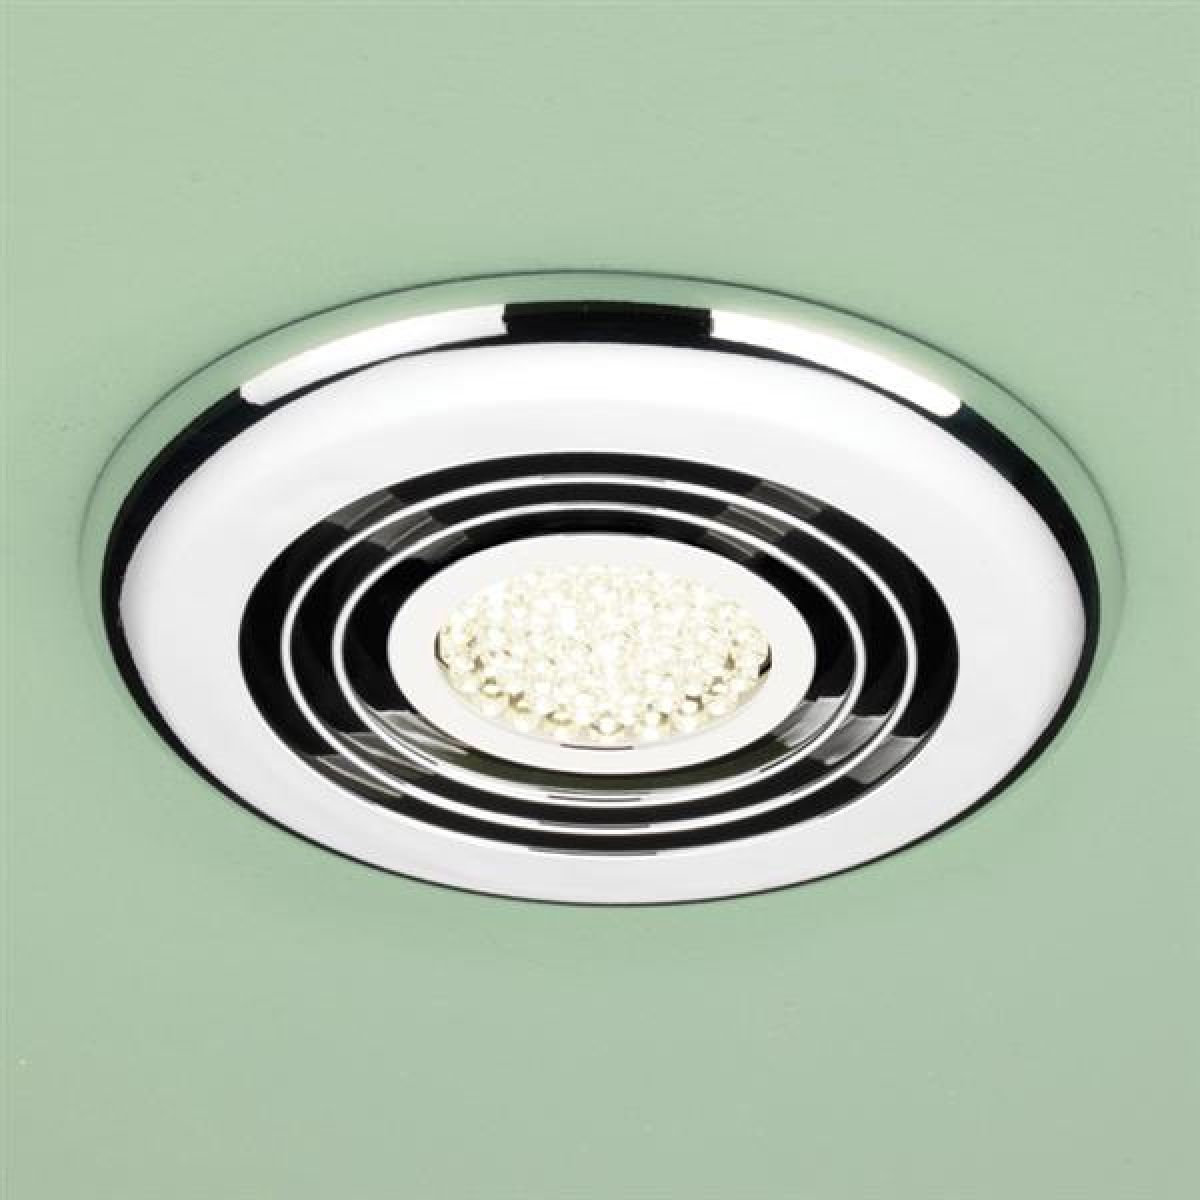 Hib Turbo Led Inline Bathroom Extractor Fan In Chrome throughout proportions 1200 X 1200